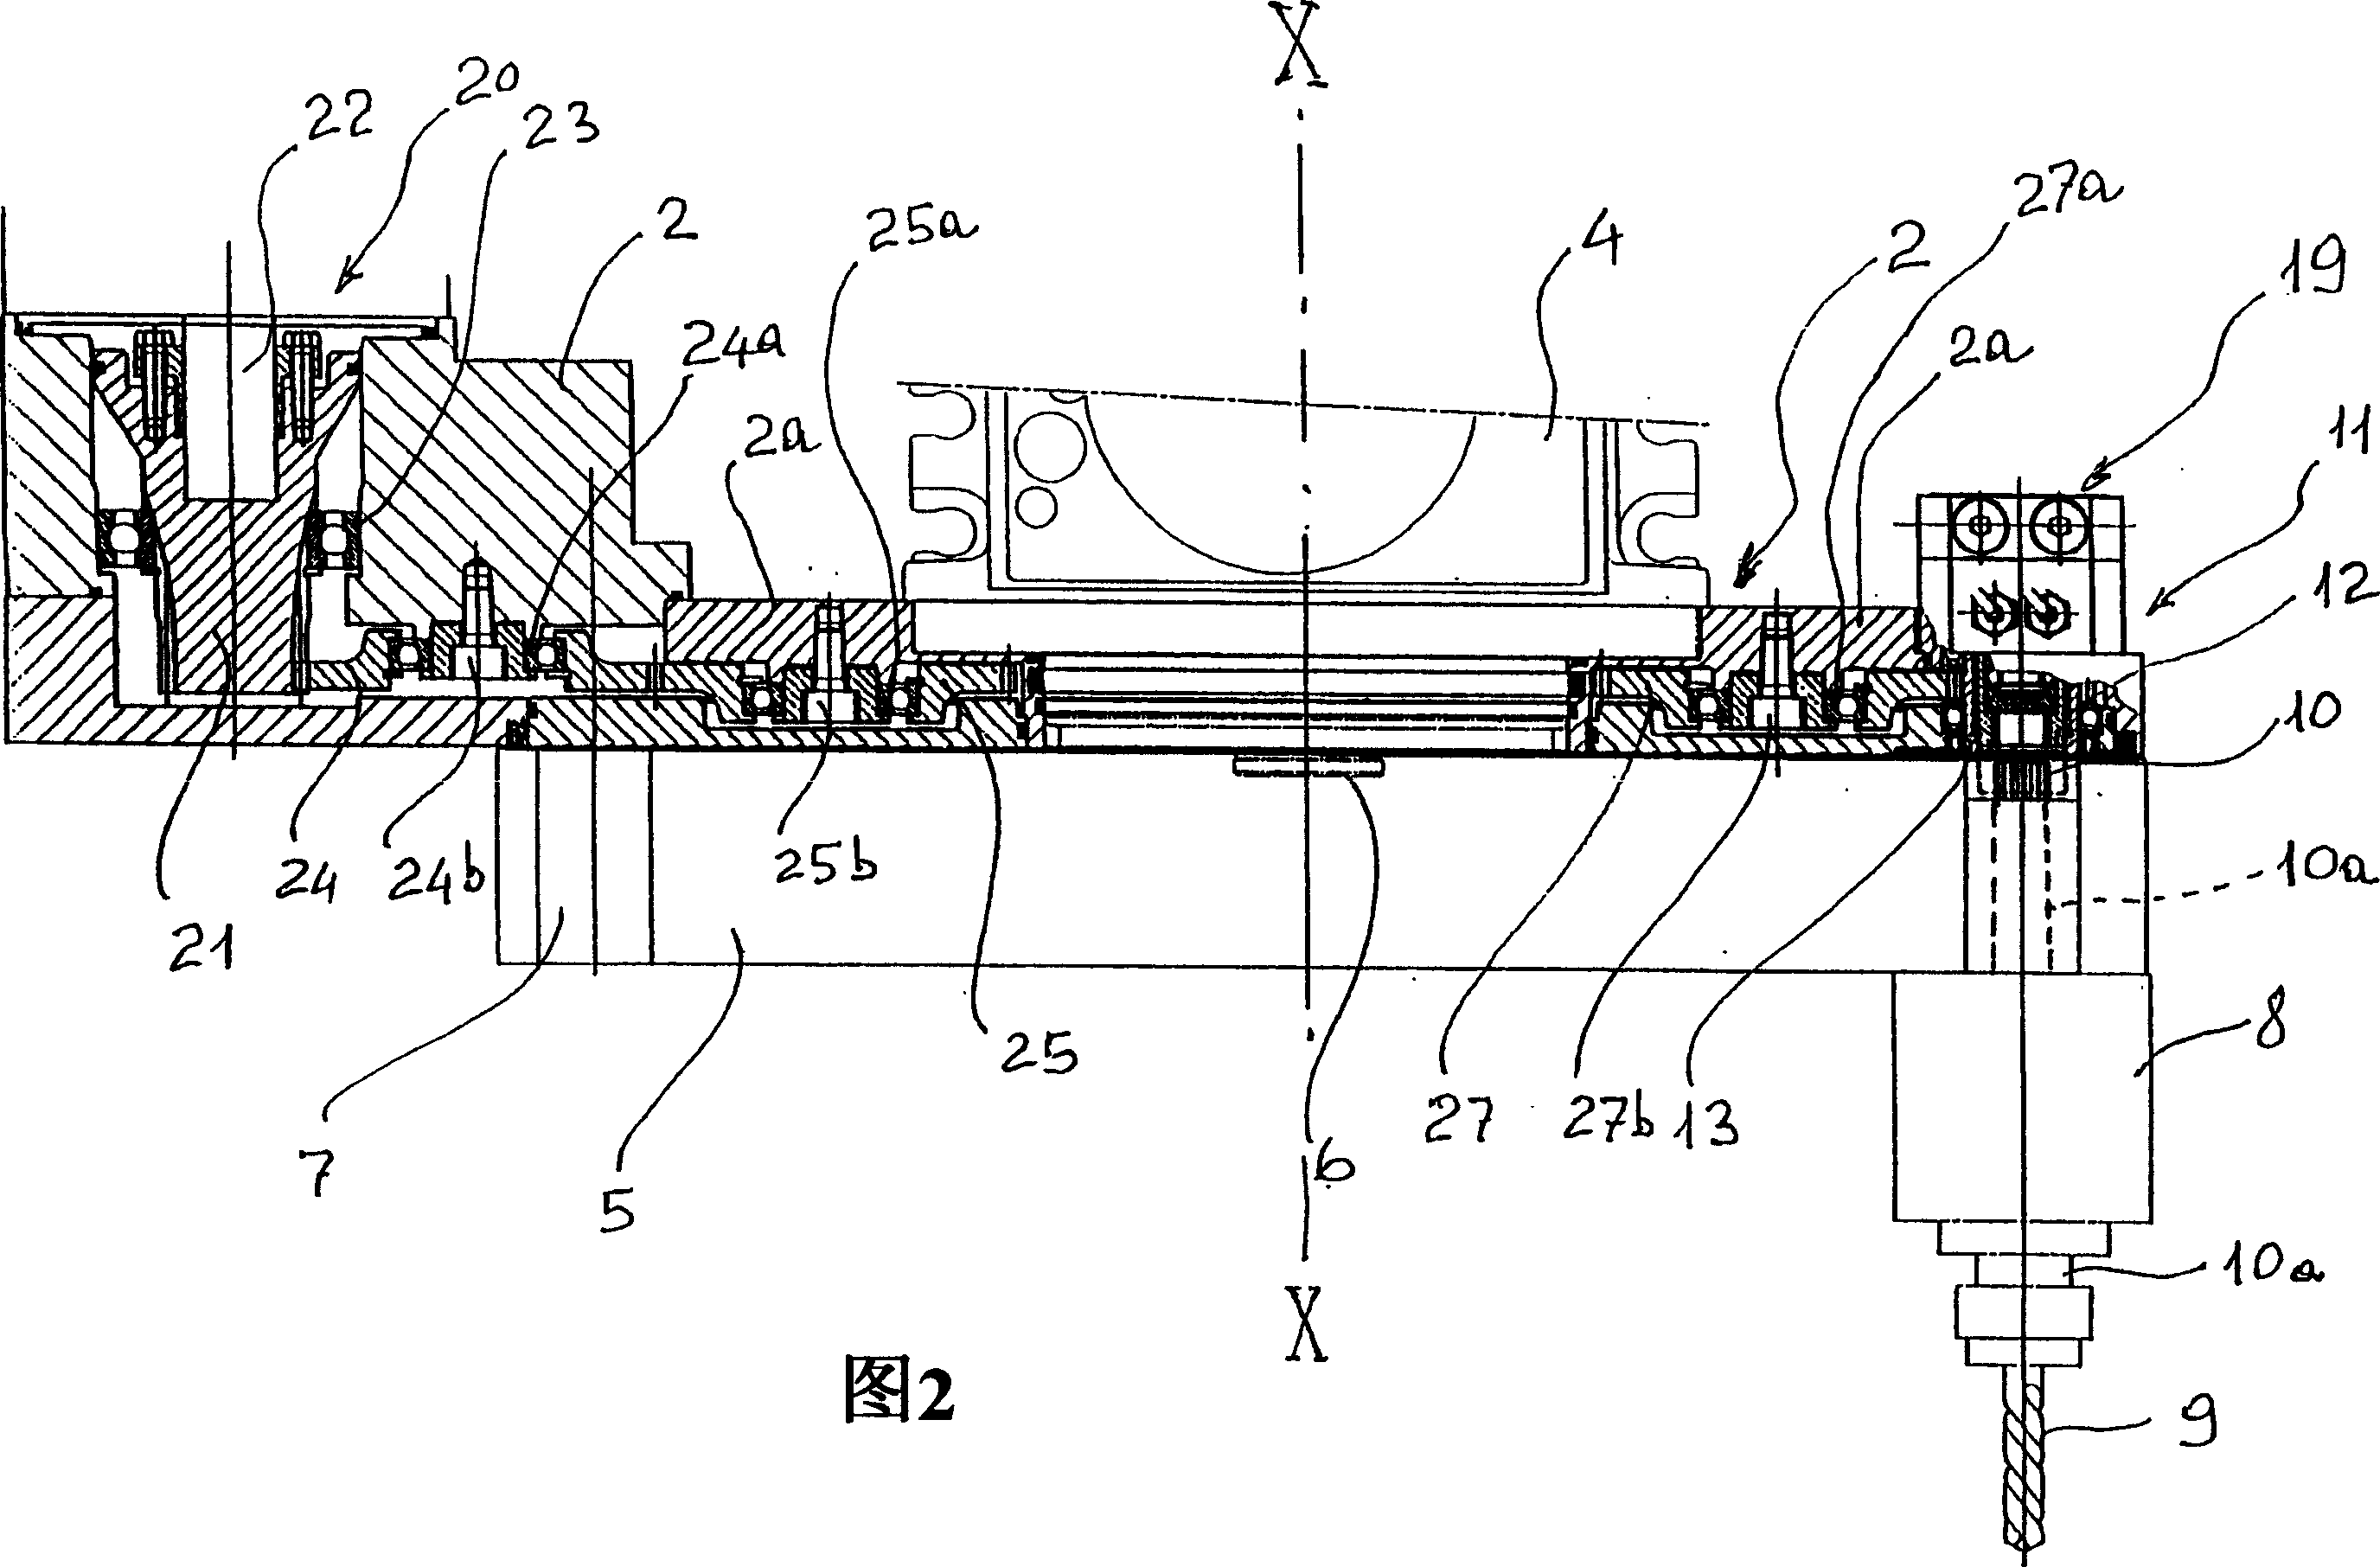 Driving system for rotary tools in a tool holder turret